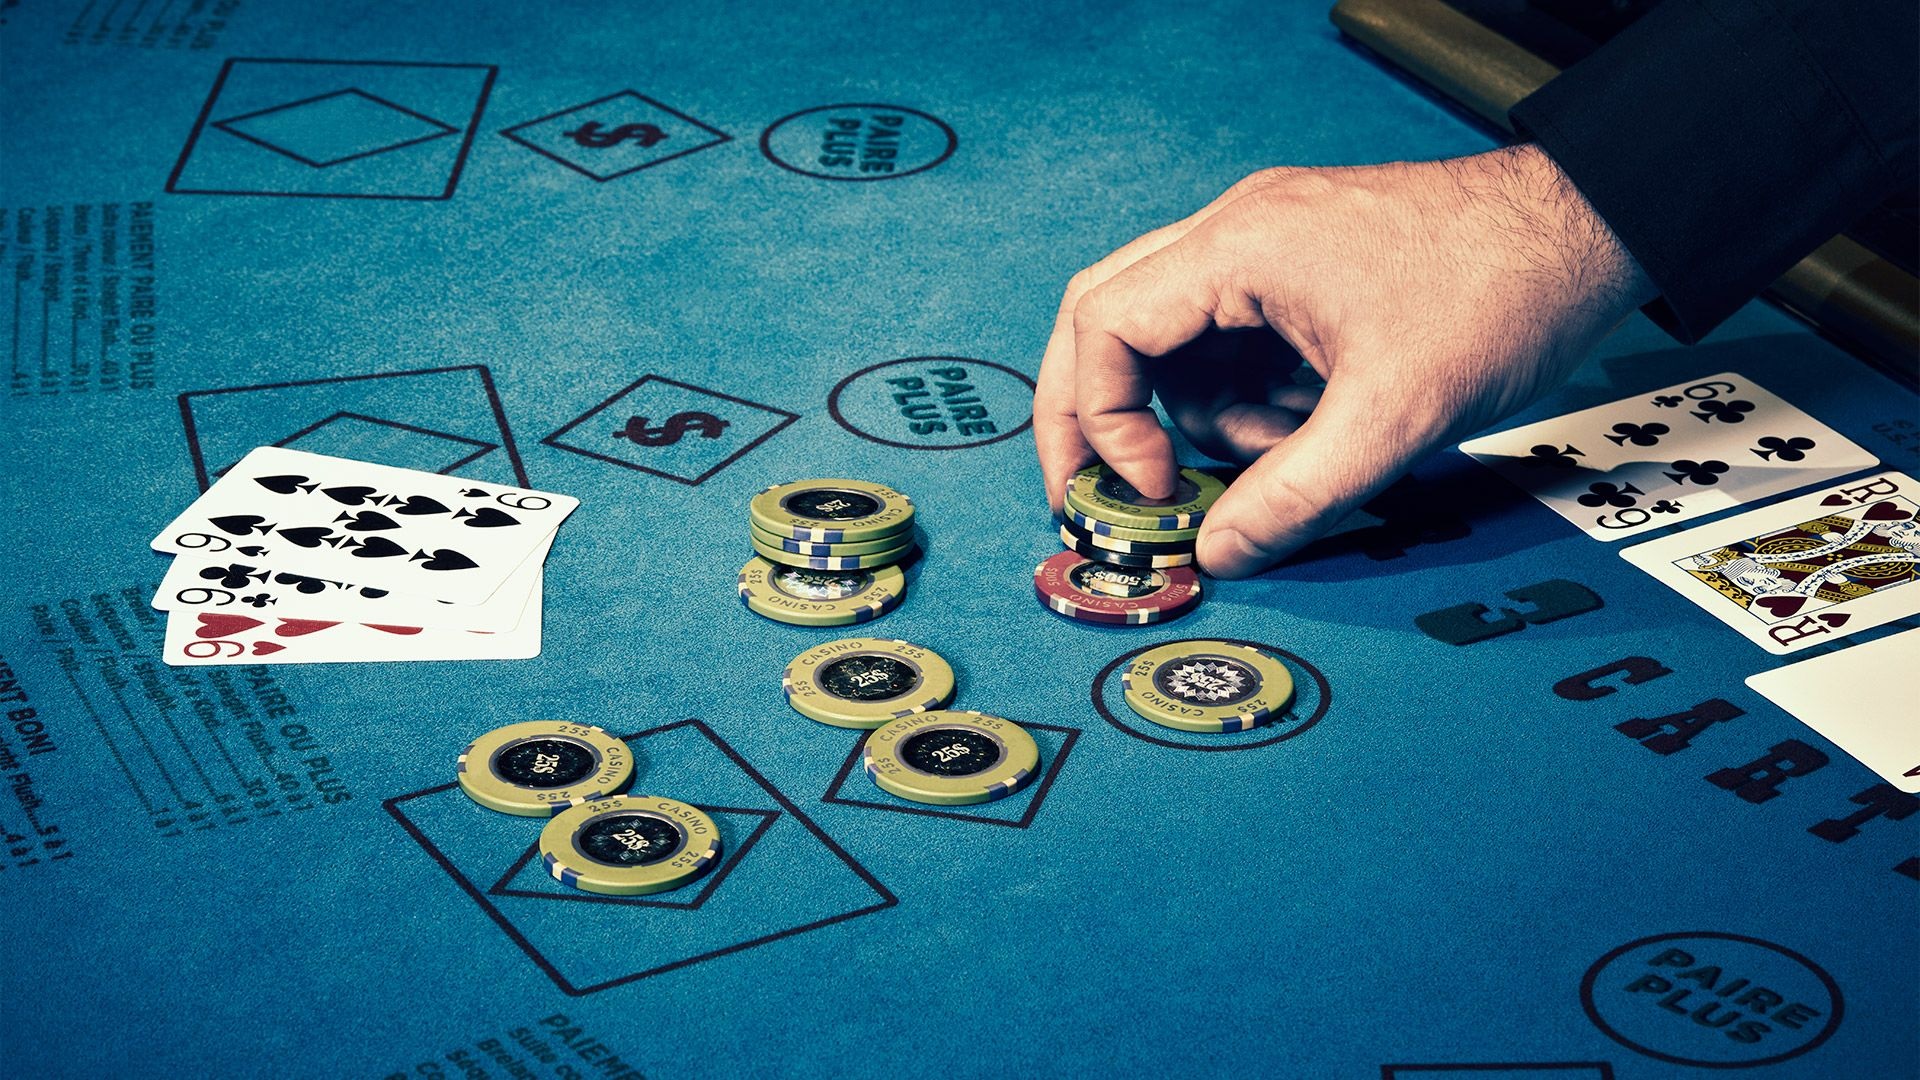 Skills that will boost up your poker earnings